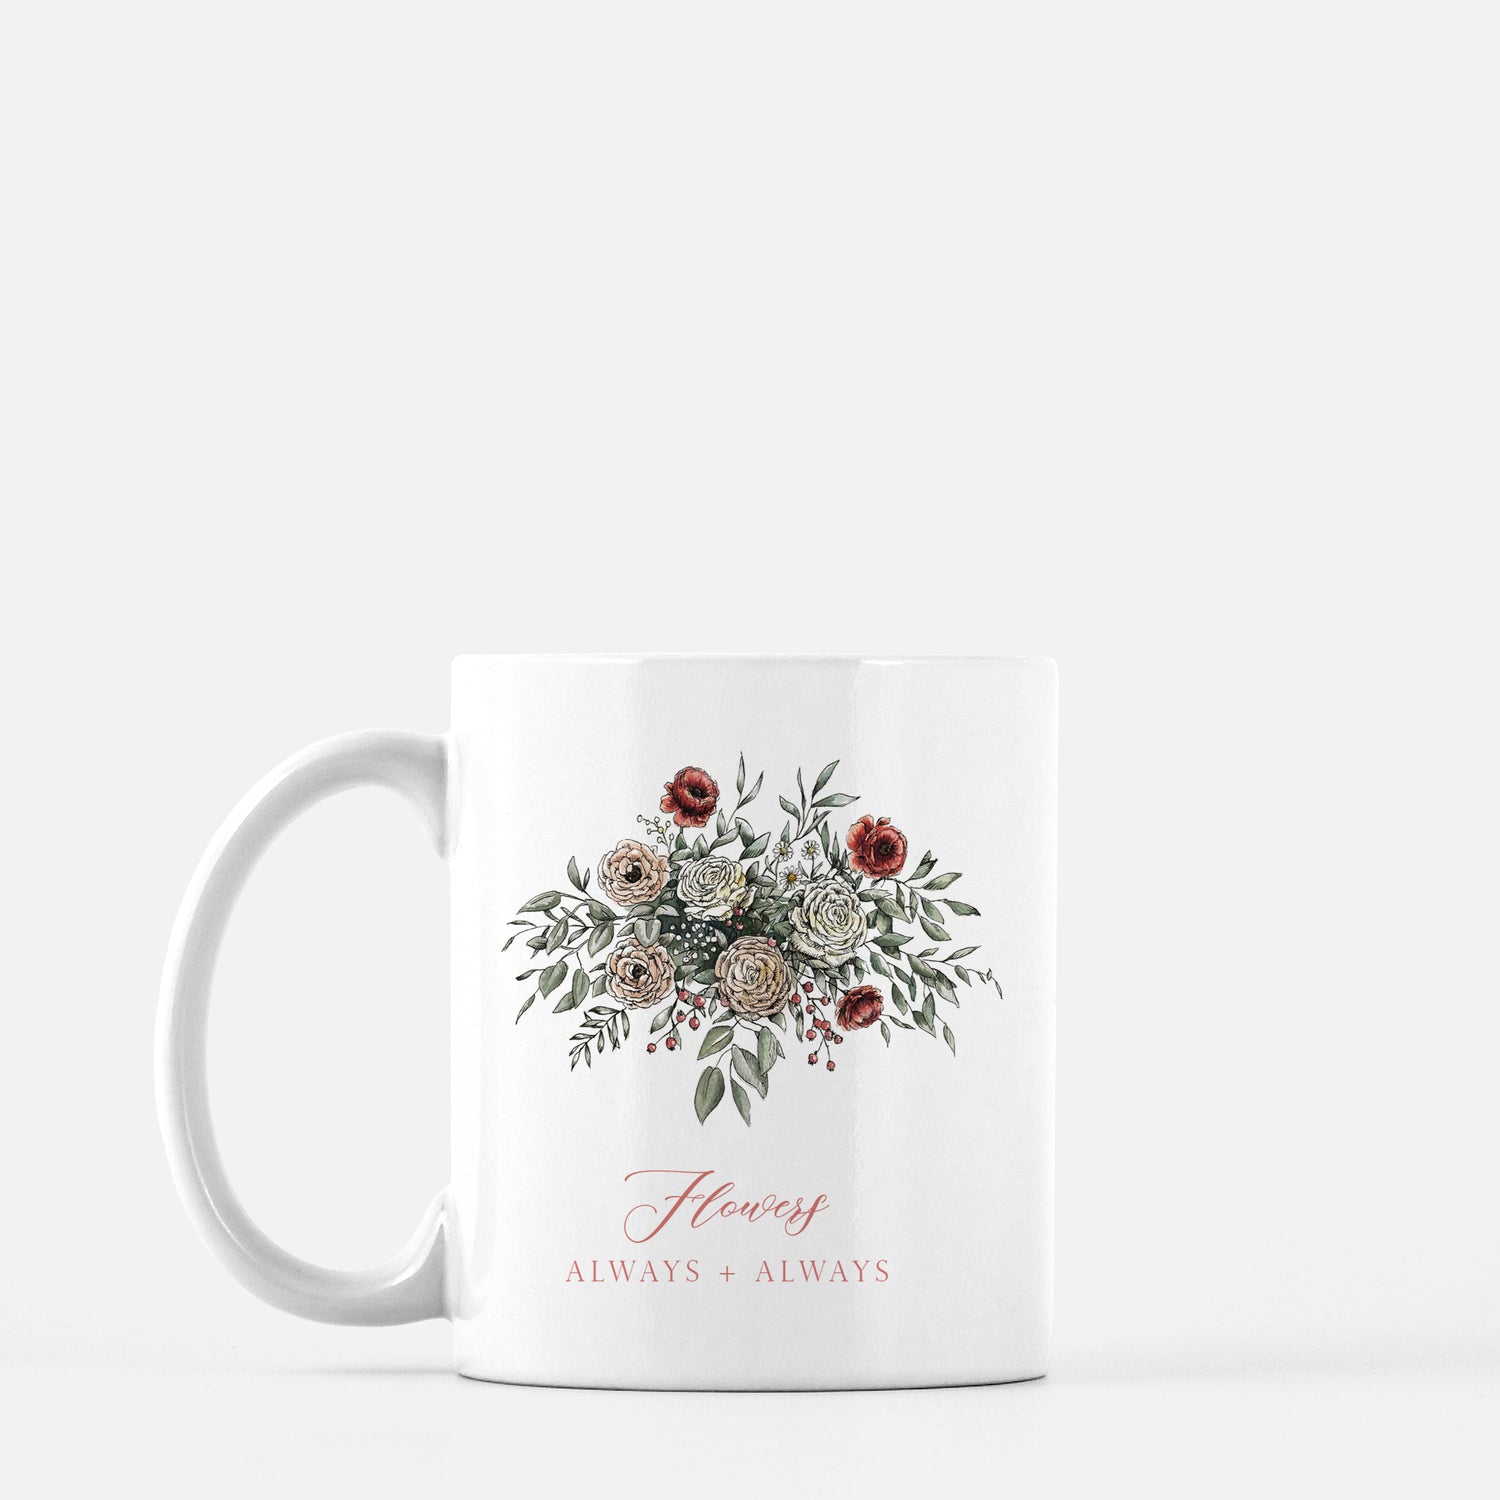 White ceramic mug with floral illustration and the words Flowers Always + Always